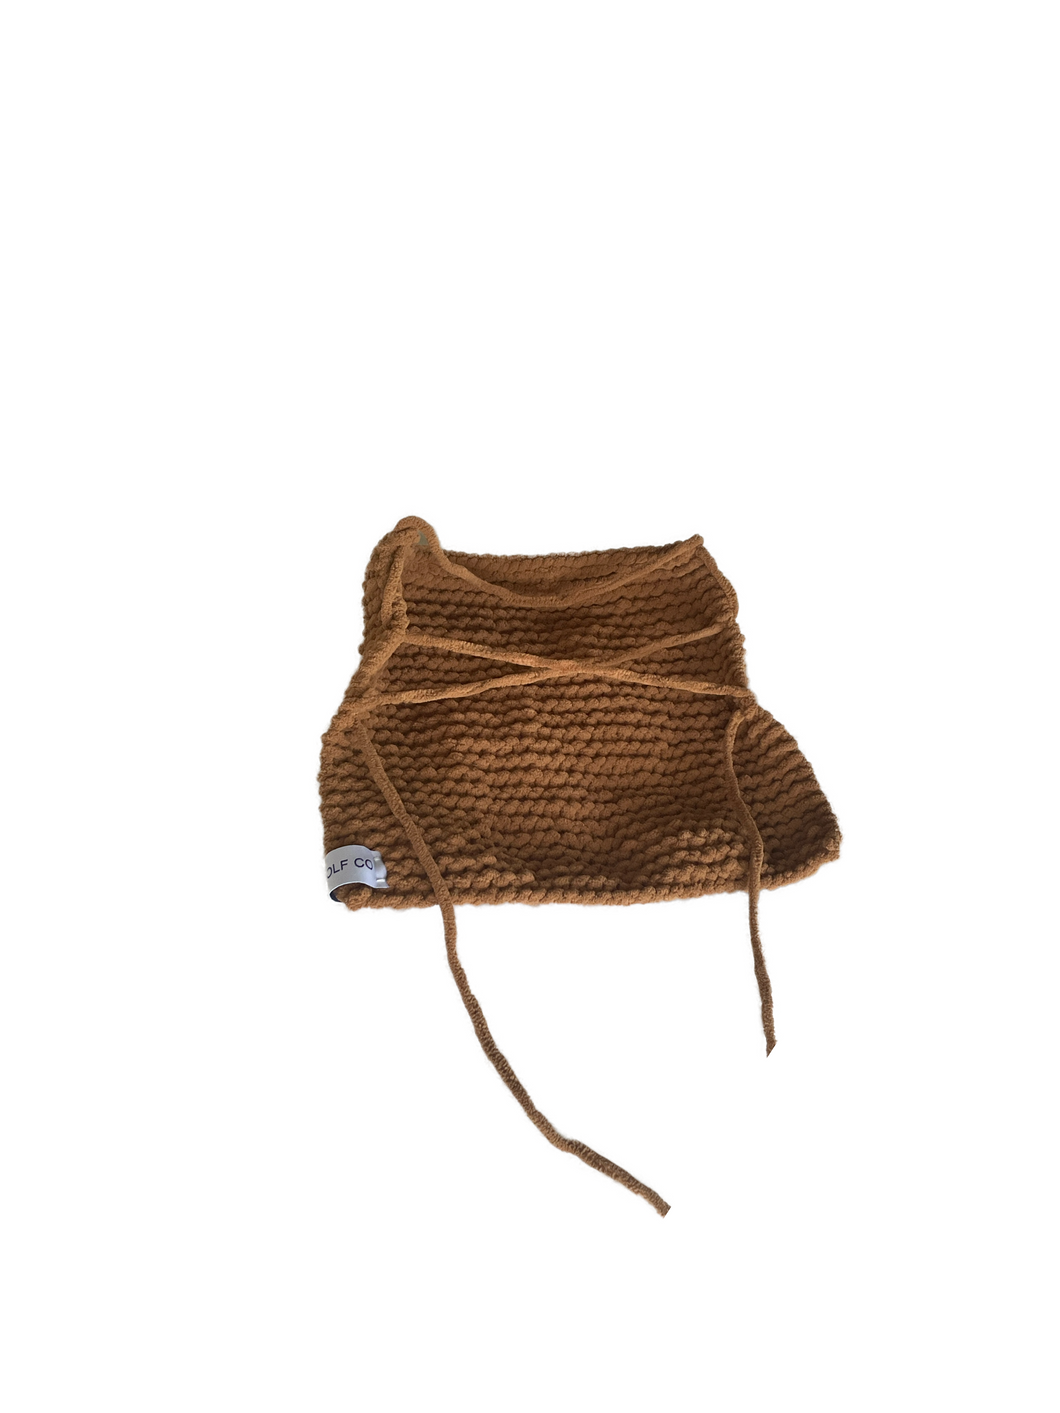 THE KNITTED SINGLET- CINNAMON TERRY